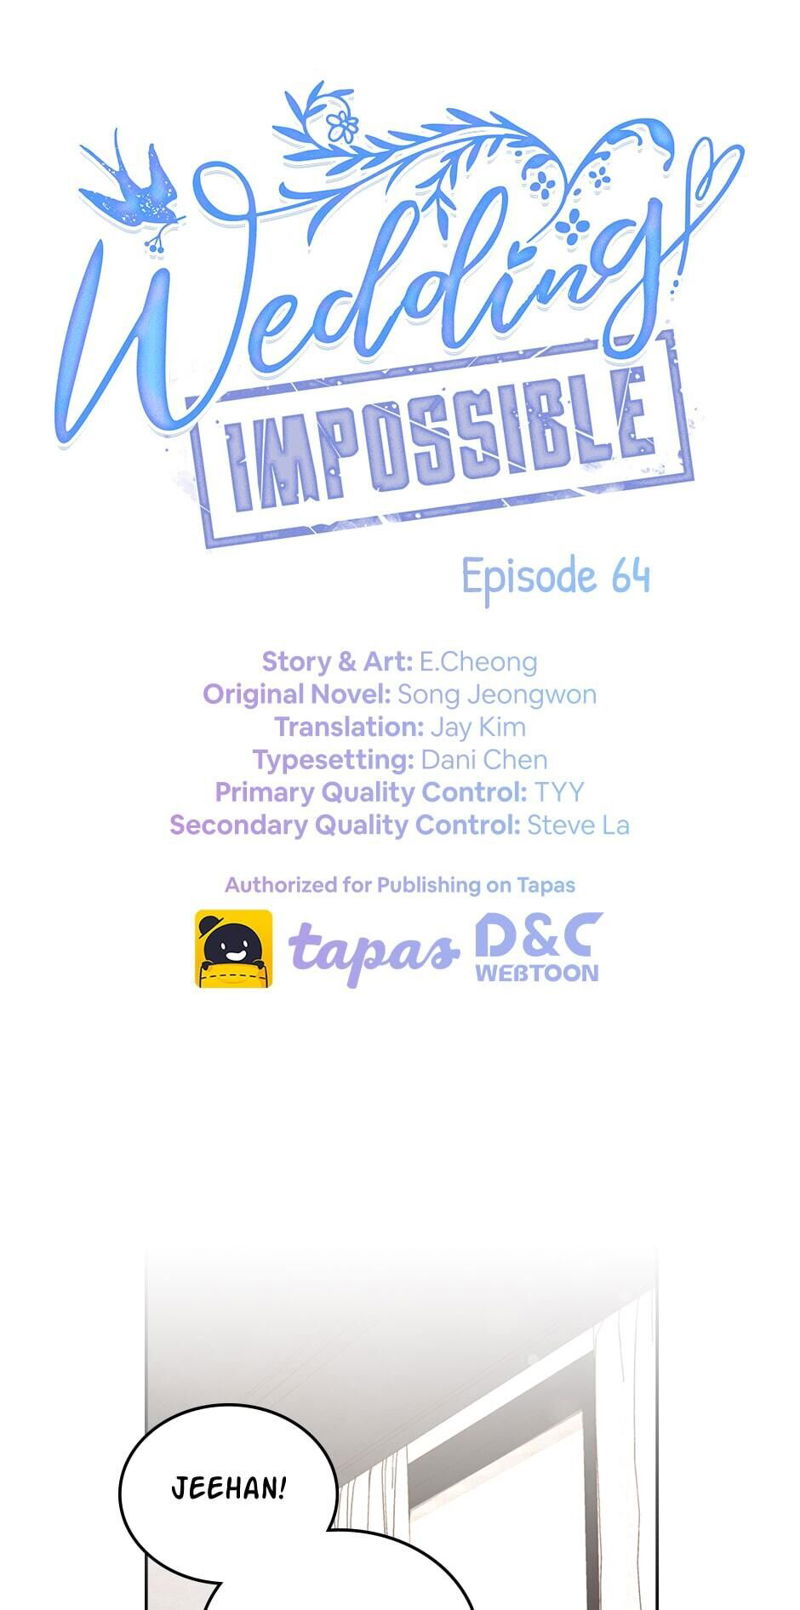 Wedding Impossible Chapter 64 page 1